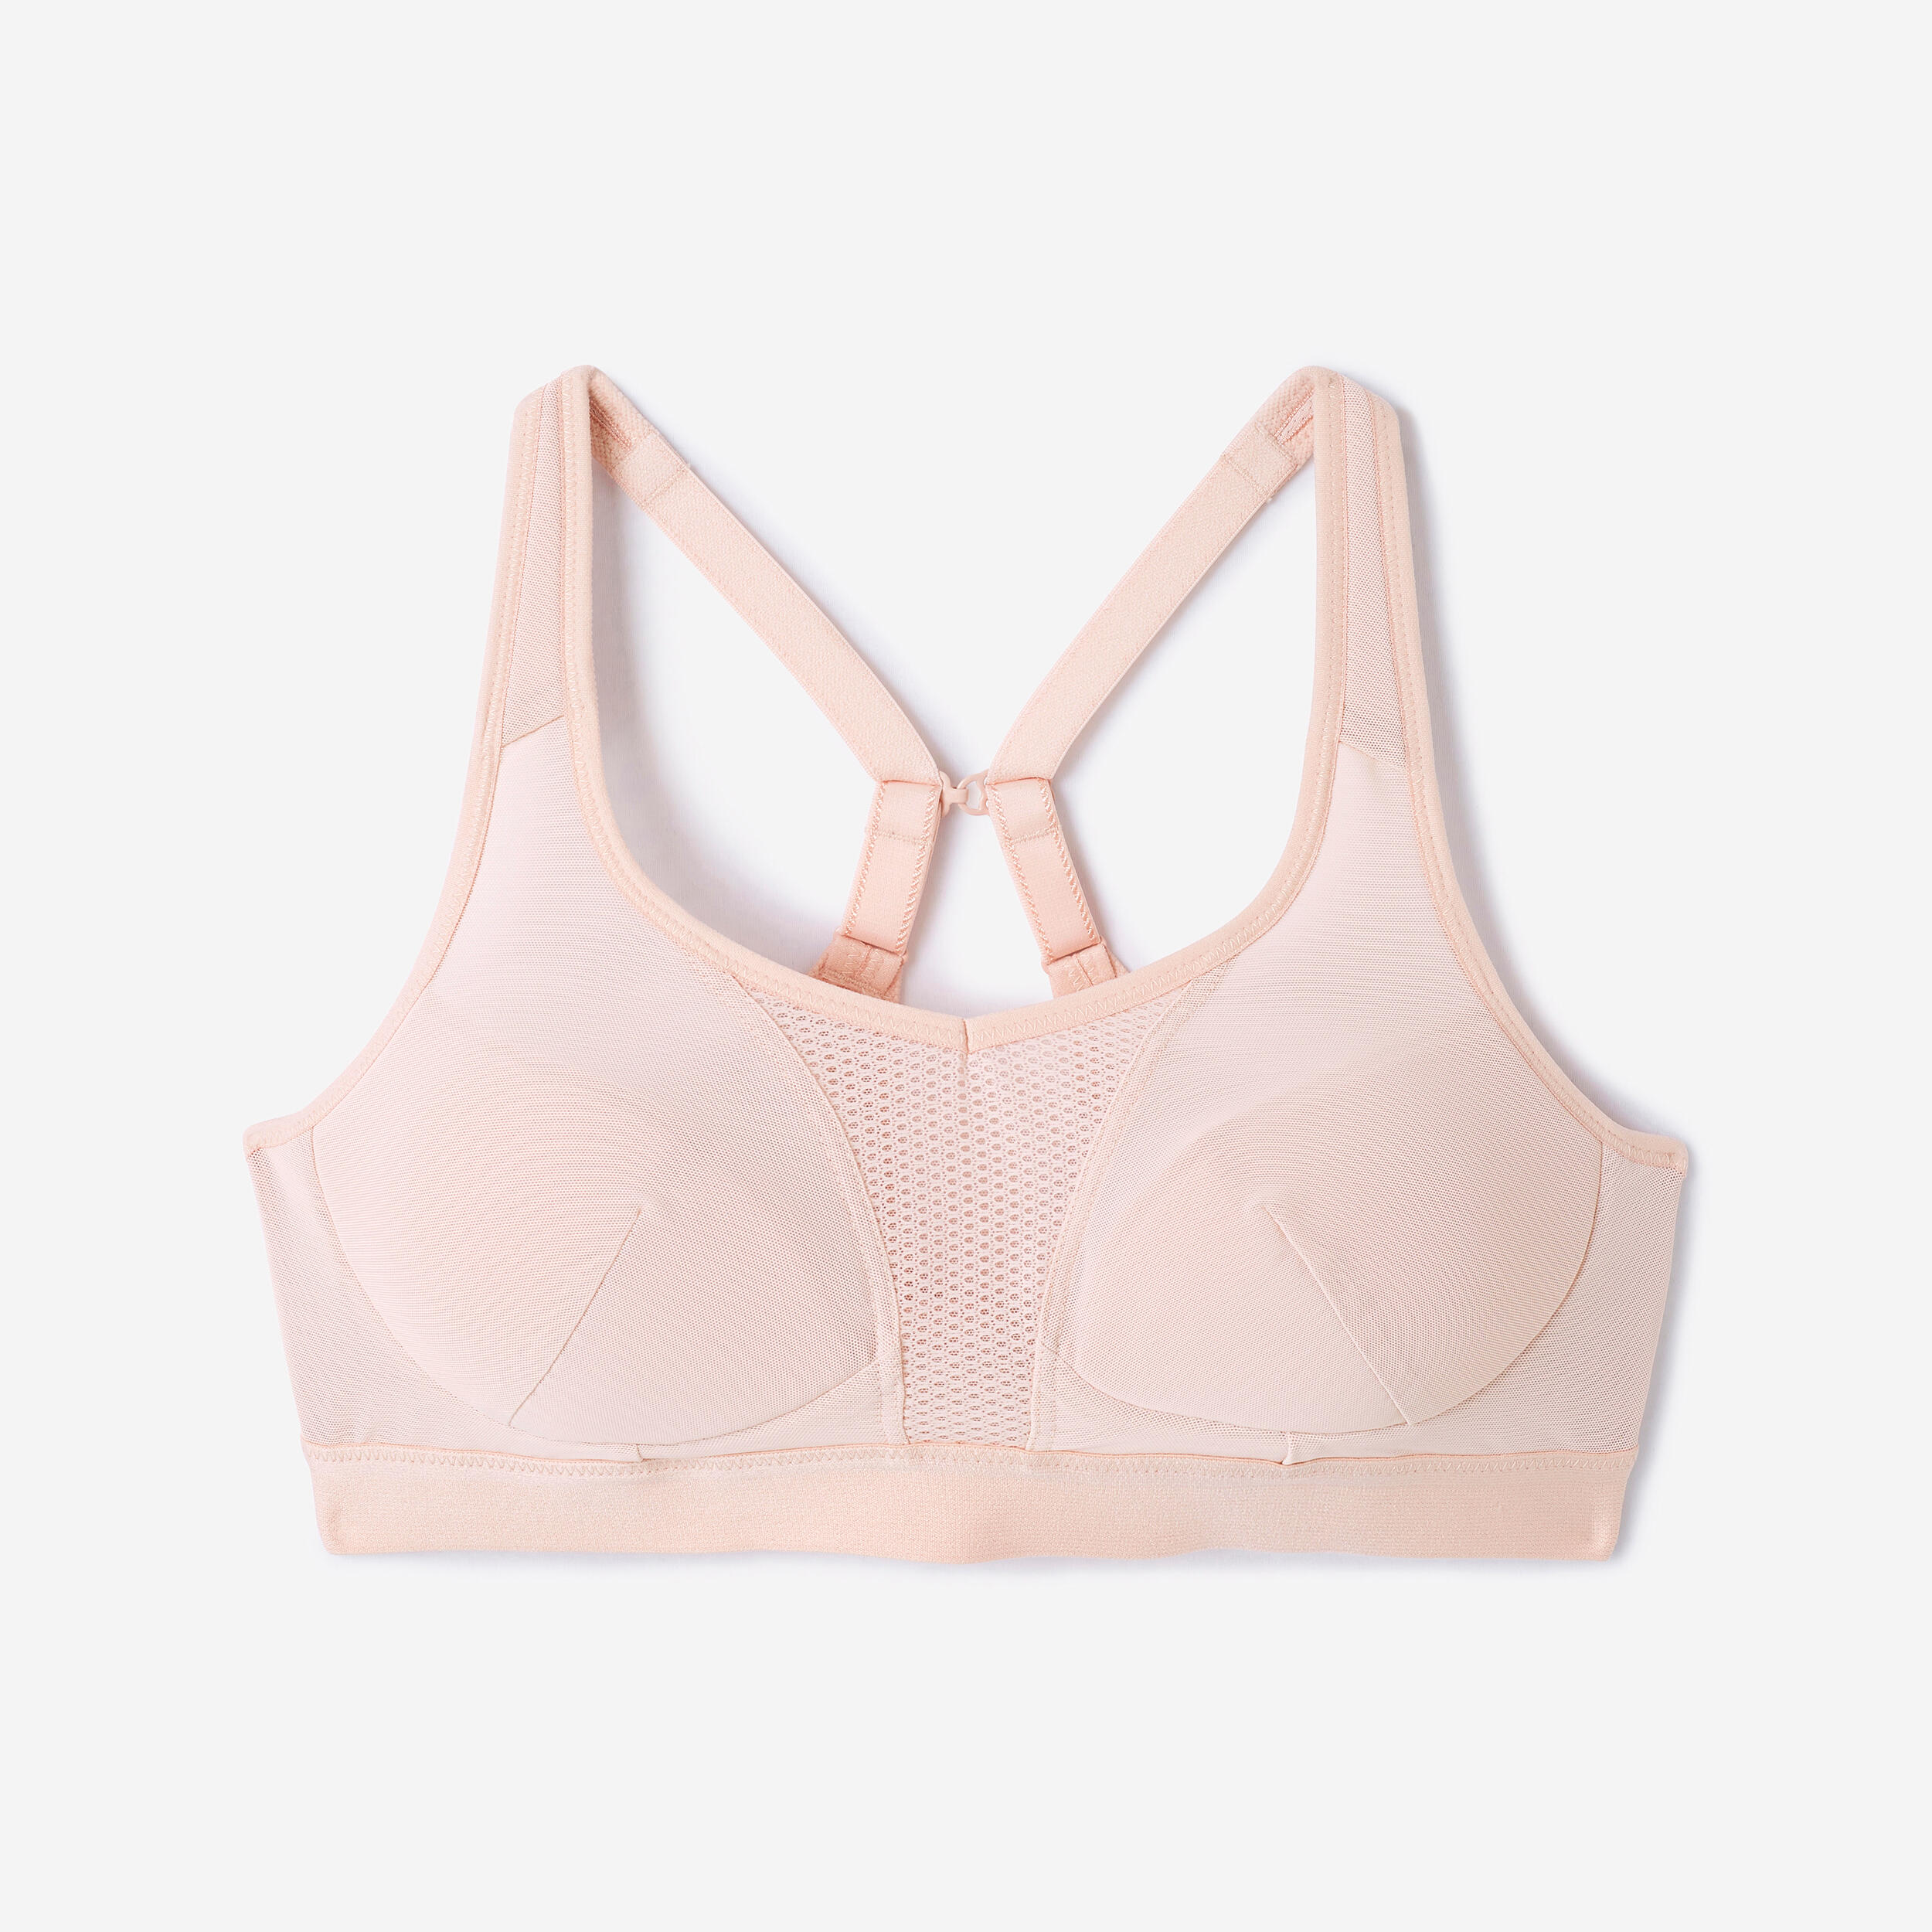 Domyos By Decathlon Pink Workout Bra-Full Coverage Heavily Padded 8643064  Price in India, Full Specifications & Offers